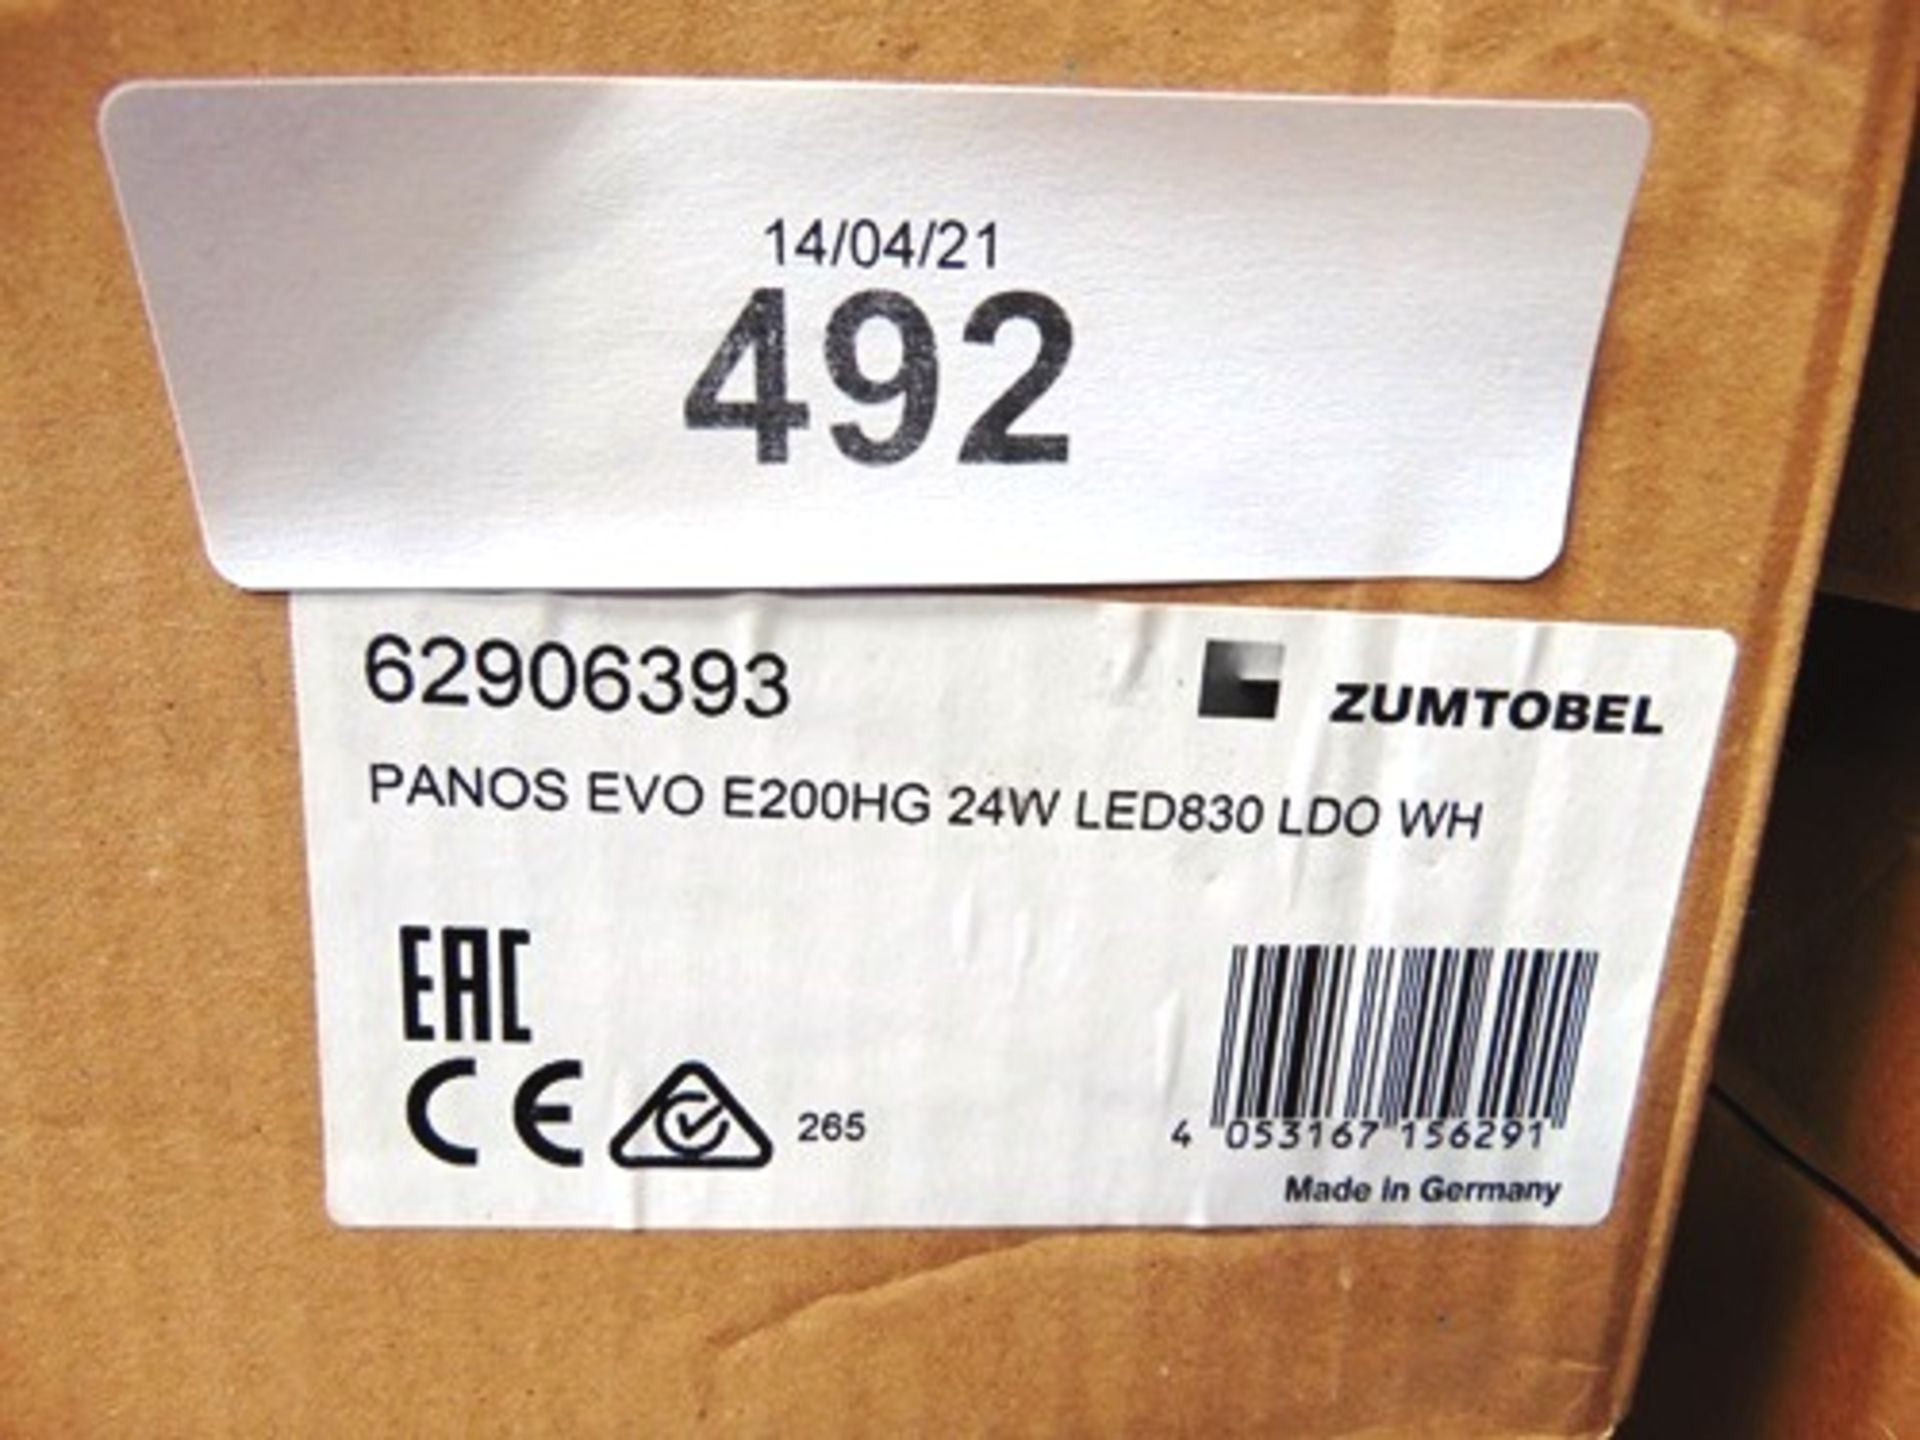 Zumtobel products including 3 x Pure Sign 150 AW NT3, 3 x Panos Evo E200HG, 24W LED 830 LDO - Image 2 of 8